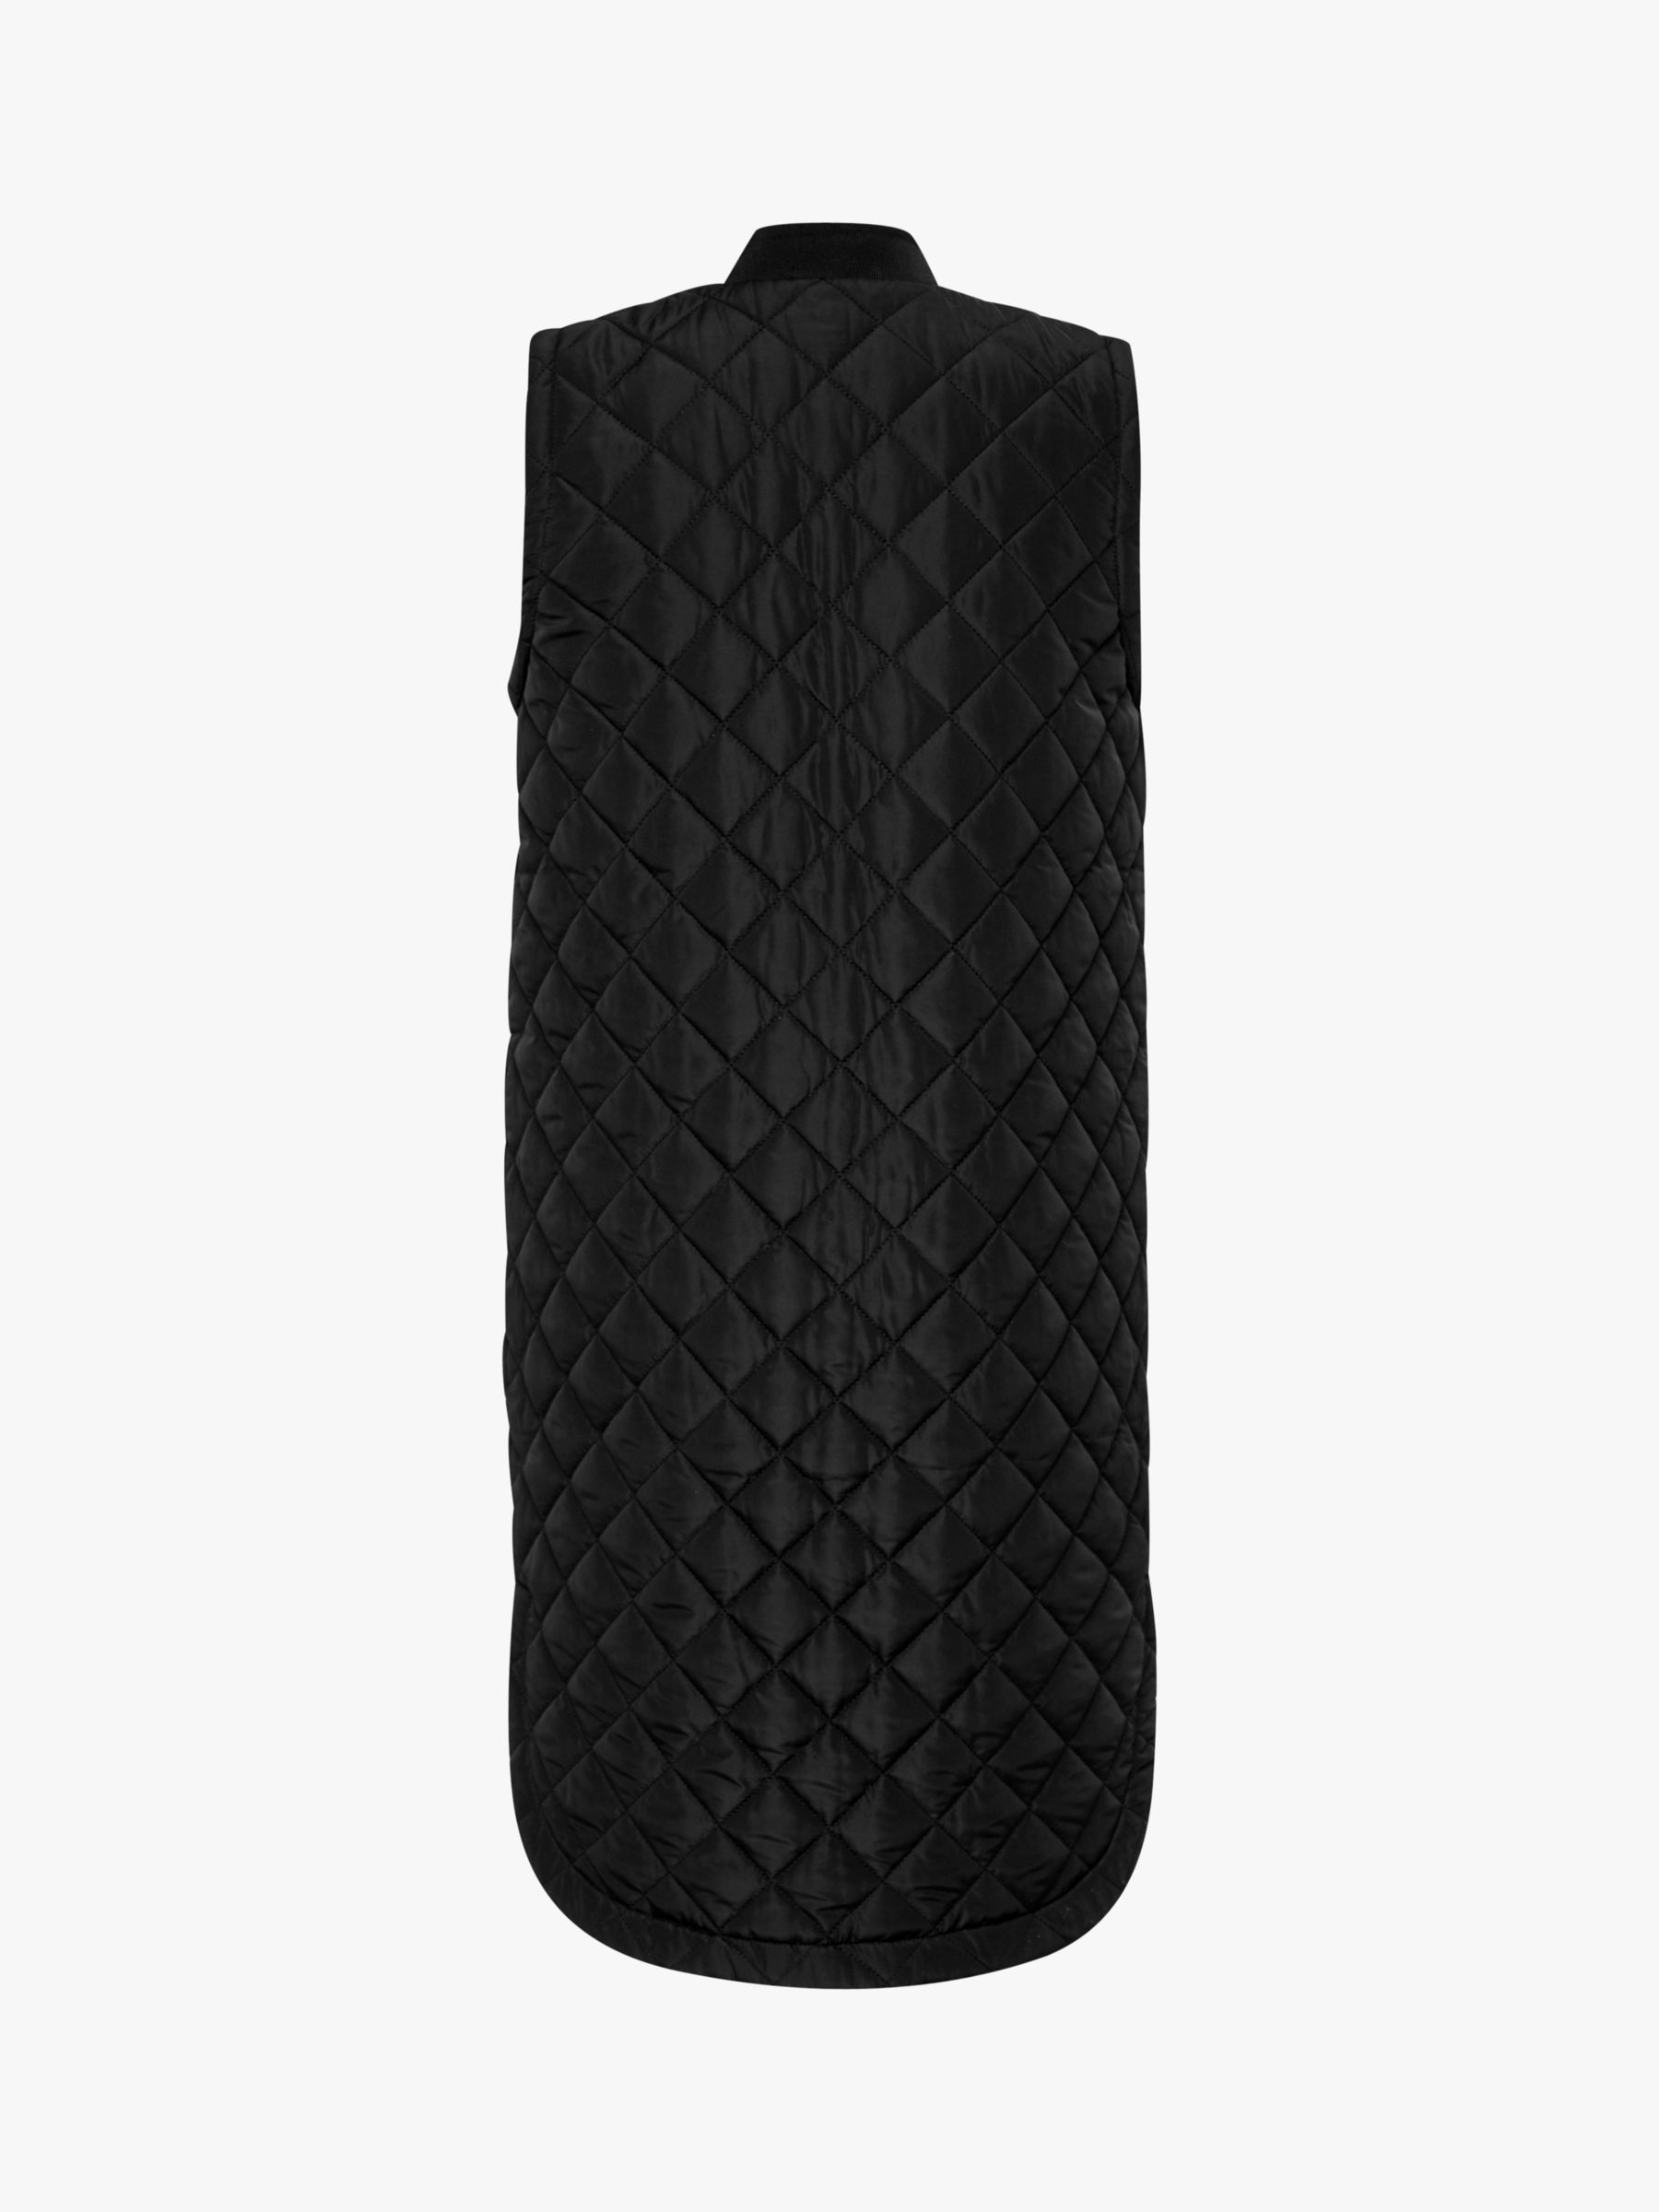 Buy KAFFE Maria Long Quilted Gilet Online at johnlewis.com